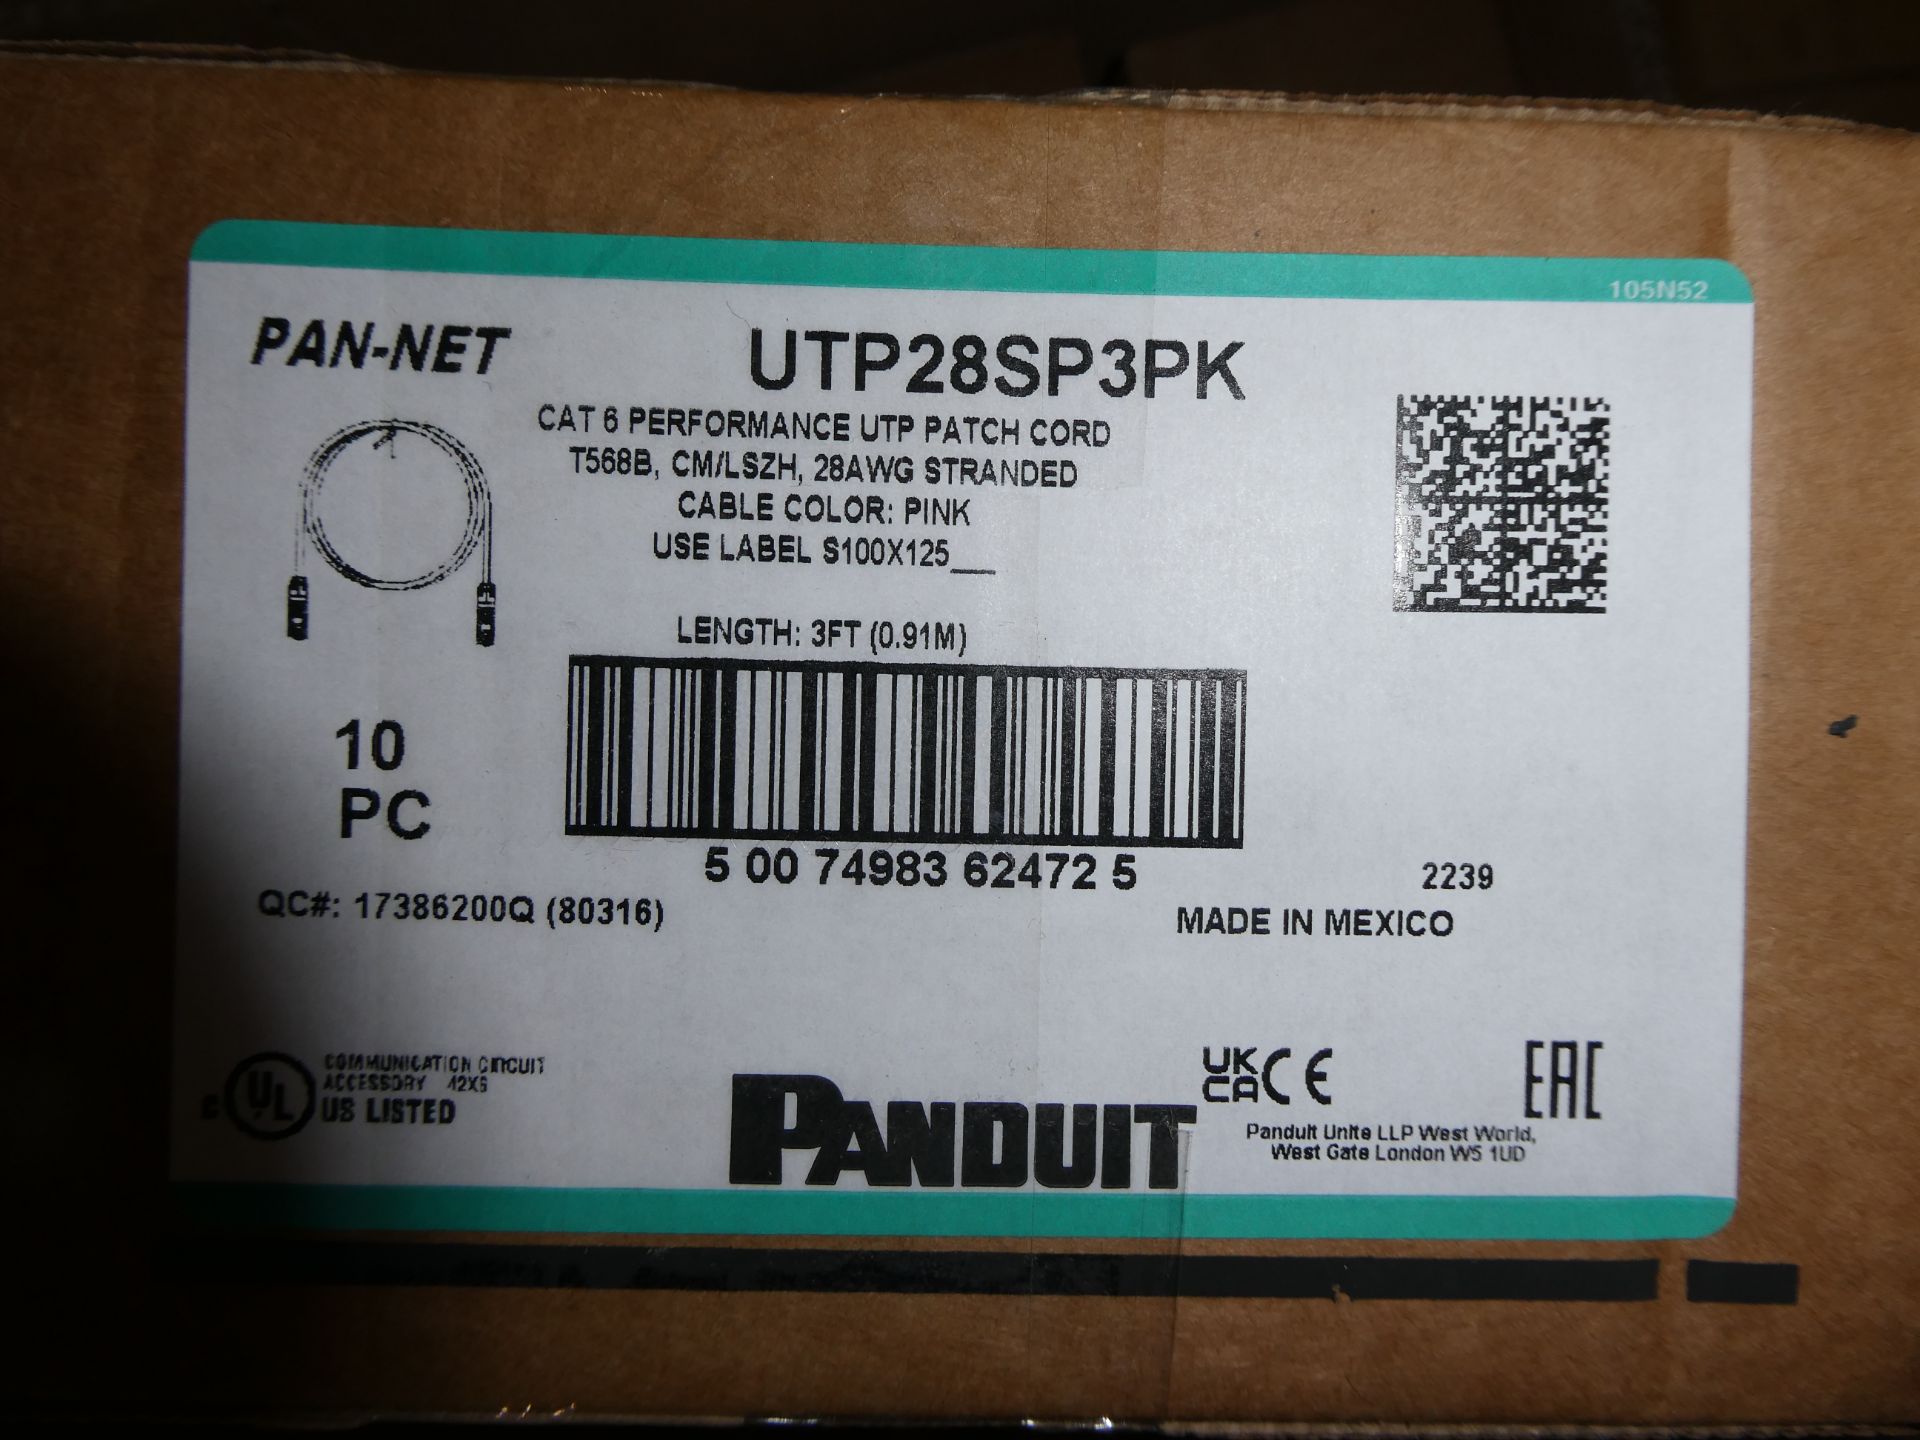 Belden 1000ft Cable Spool 18AWG, Panduit Cat 6 Patch Cord - Image 4 of 7